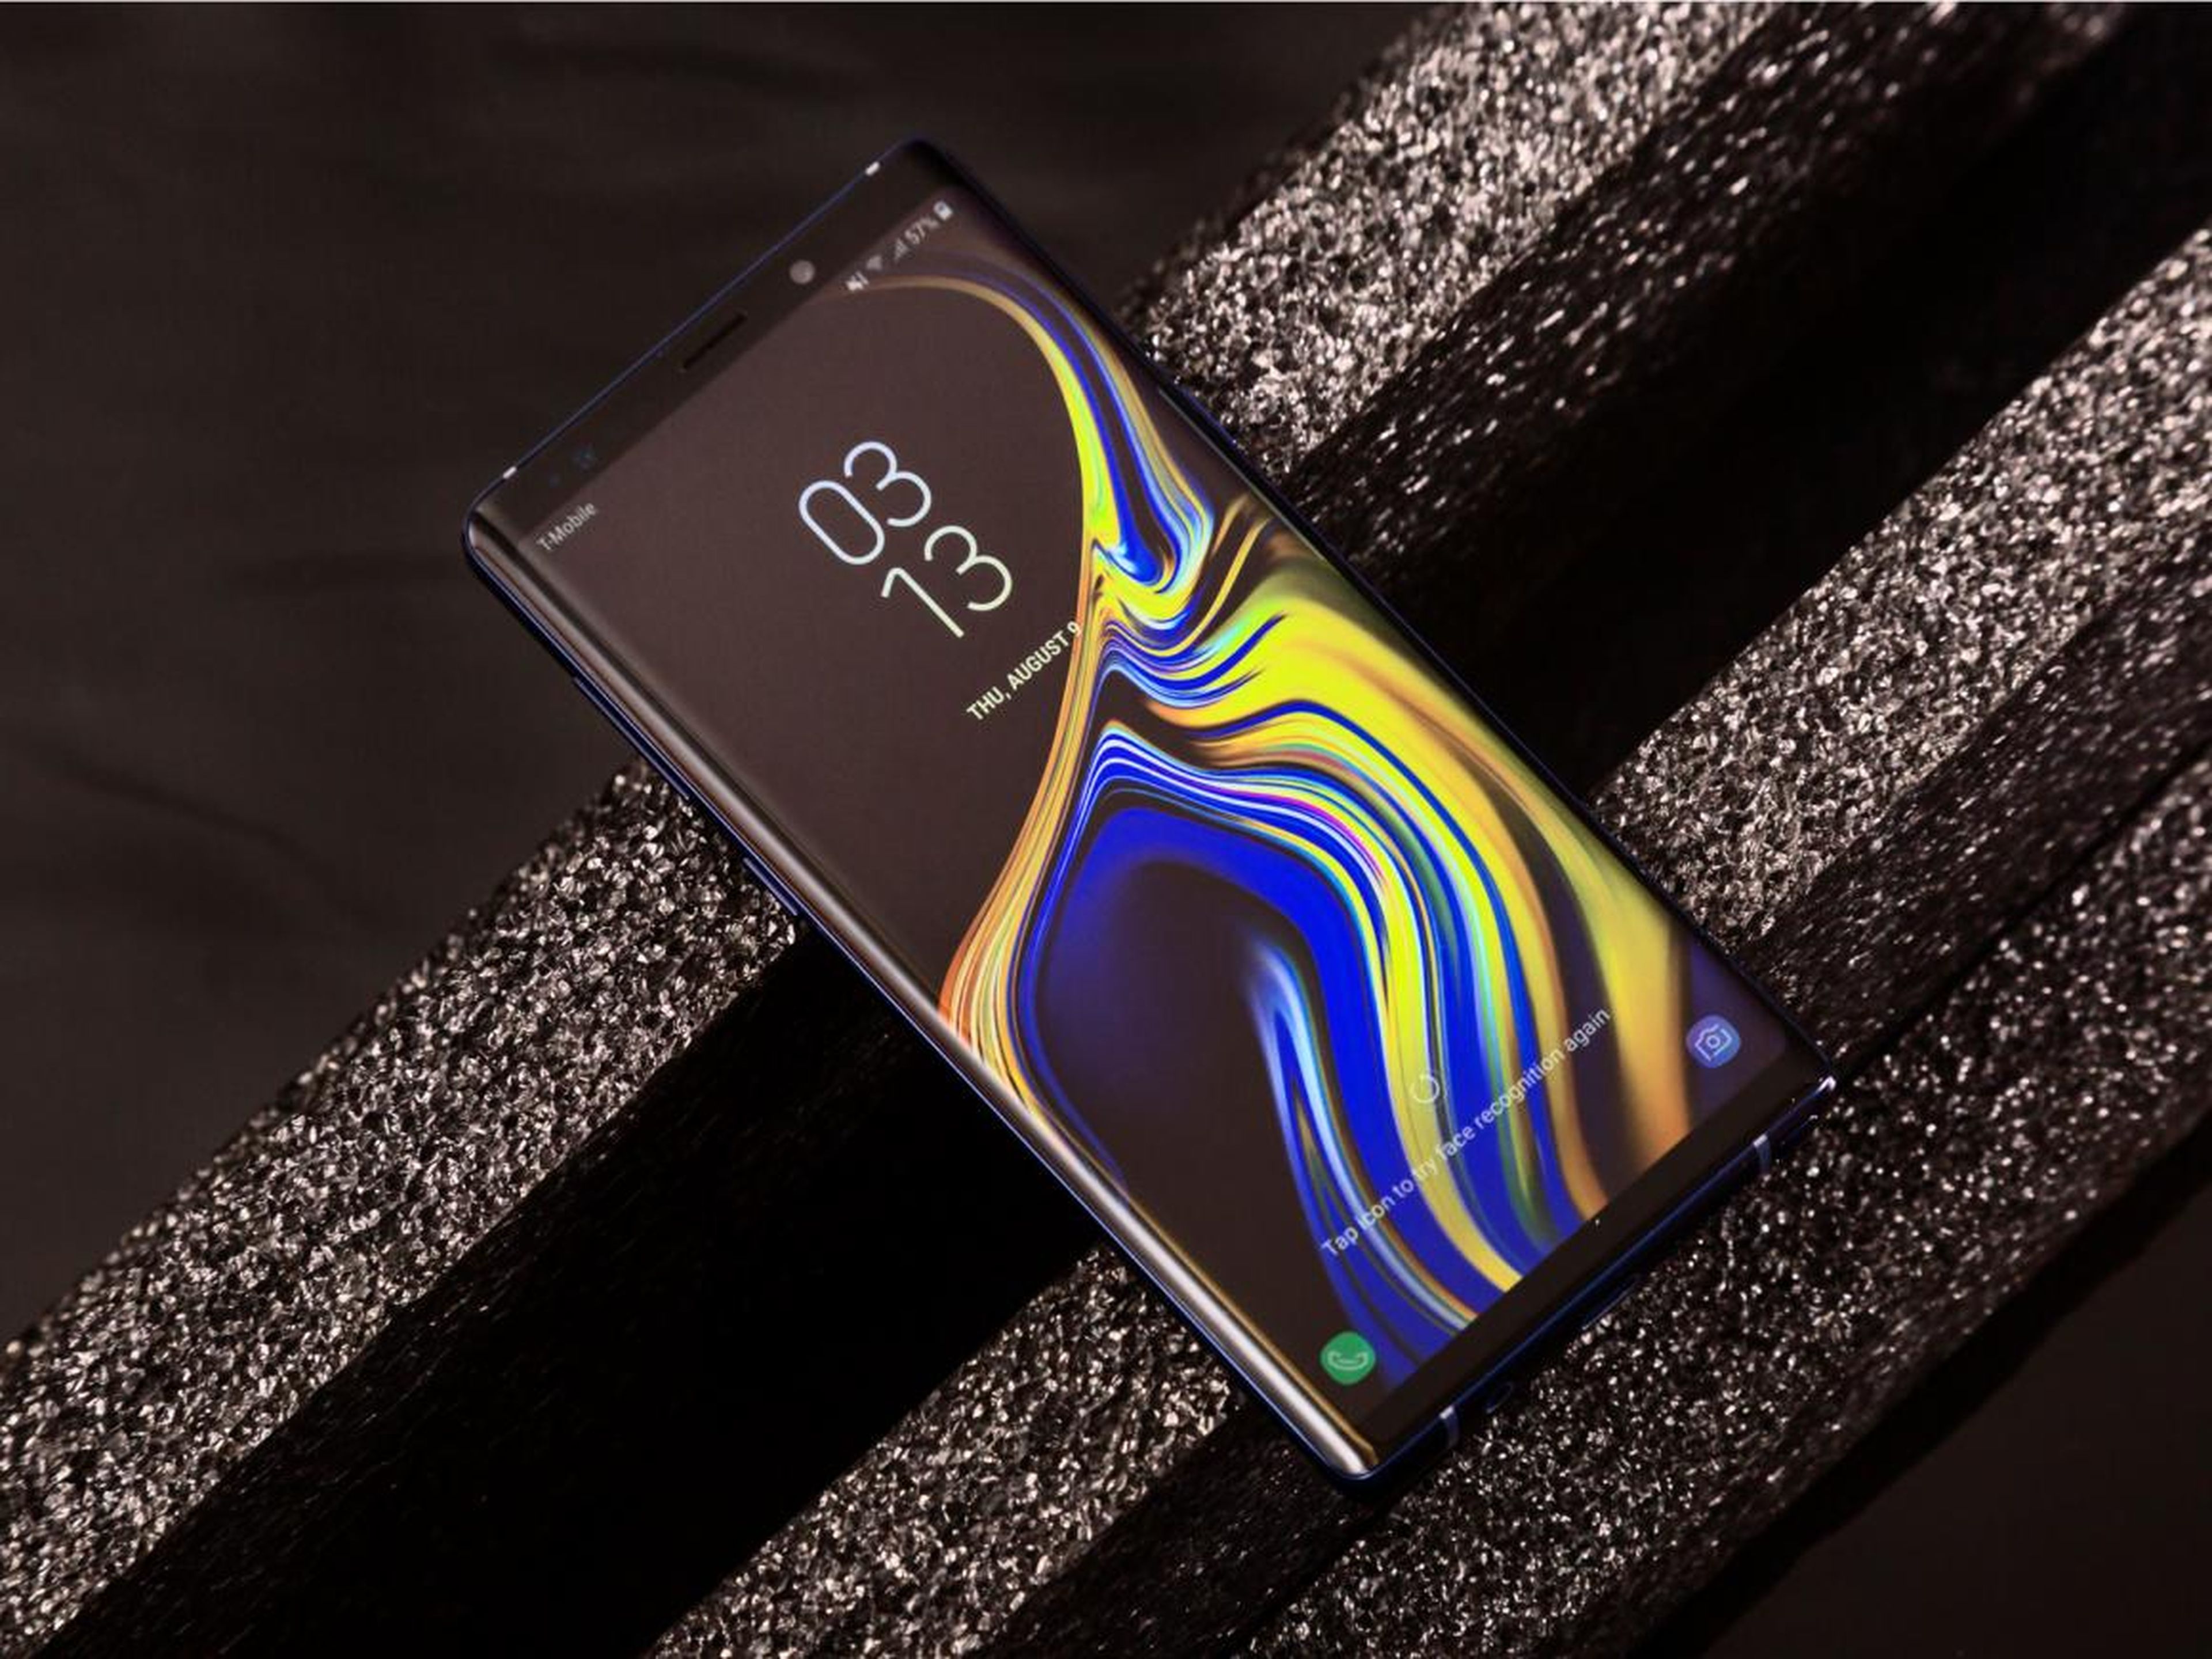 But the Galaxy Note 9 beats the Galaxy S9 in several ways. For one, it has a larger display.